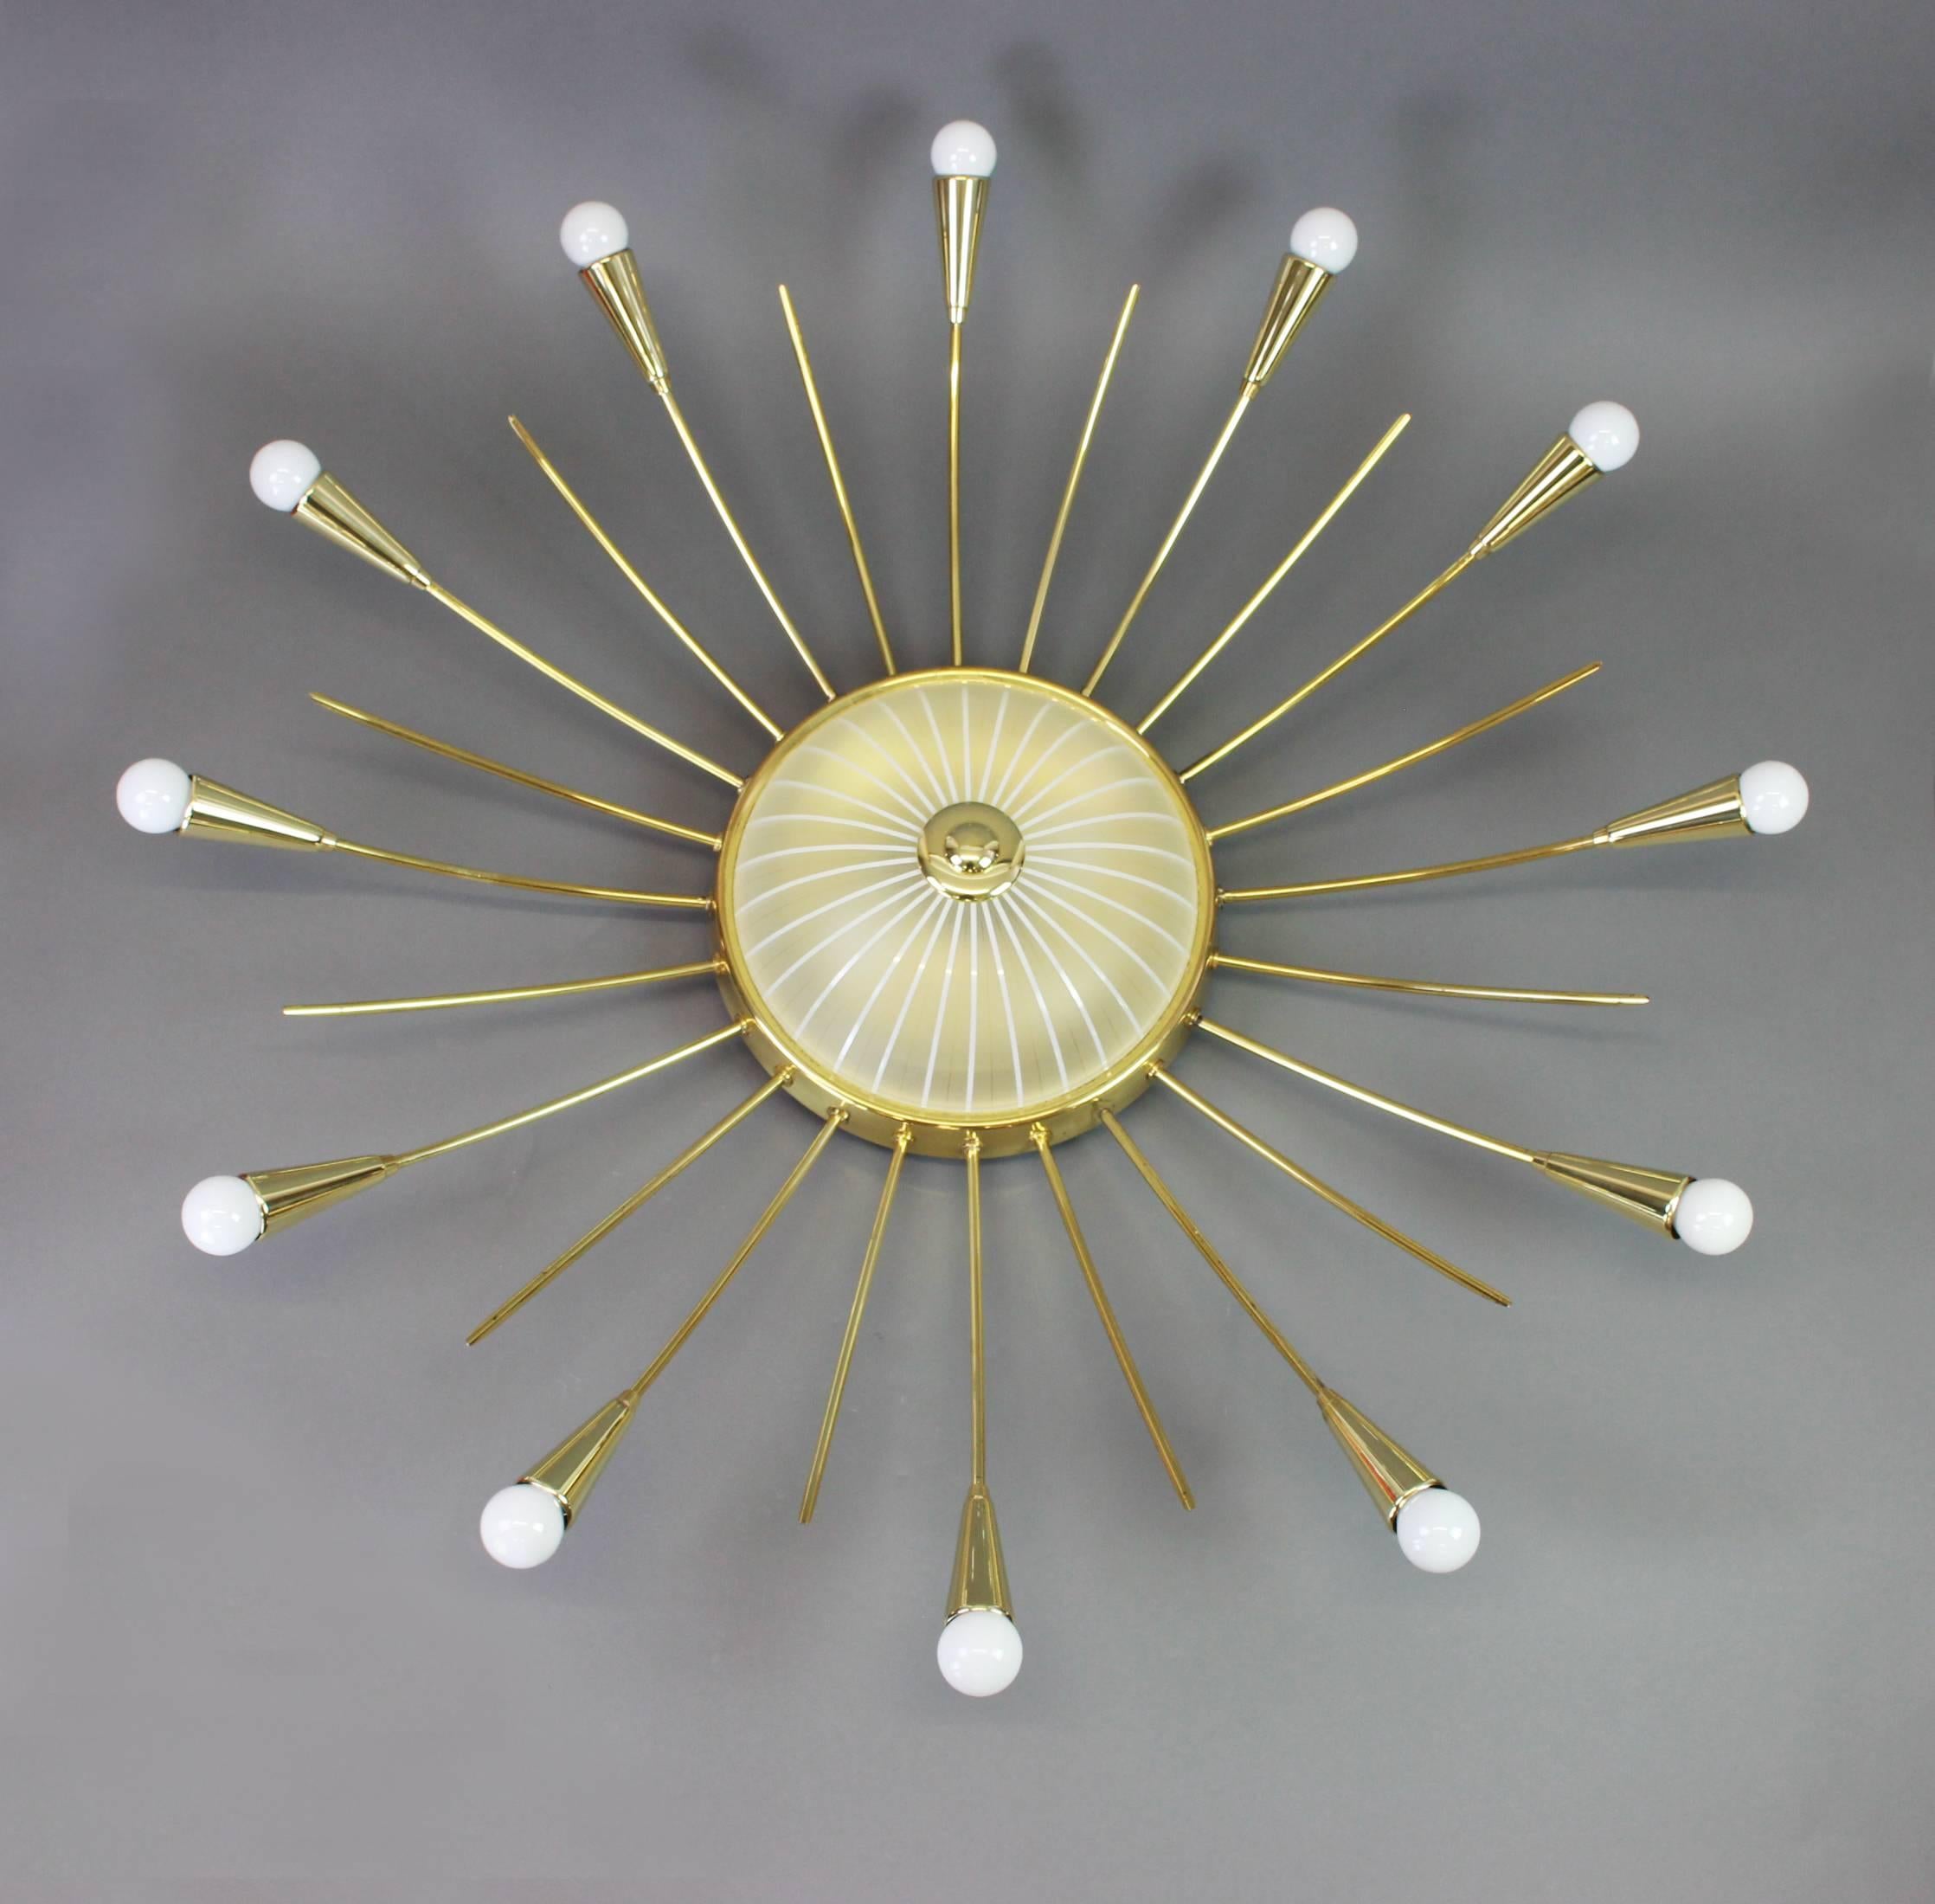 Stunning Mid-Century sunburst chandelier, in Stilnovo style made in the 1950s.
Very elegant and rare version with illuminated center under a frosted glass dome.

High quality and in very good condition. Cleaned, well-wired and ready to use. 

The